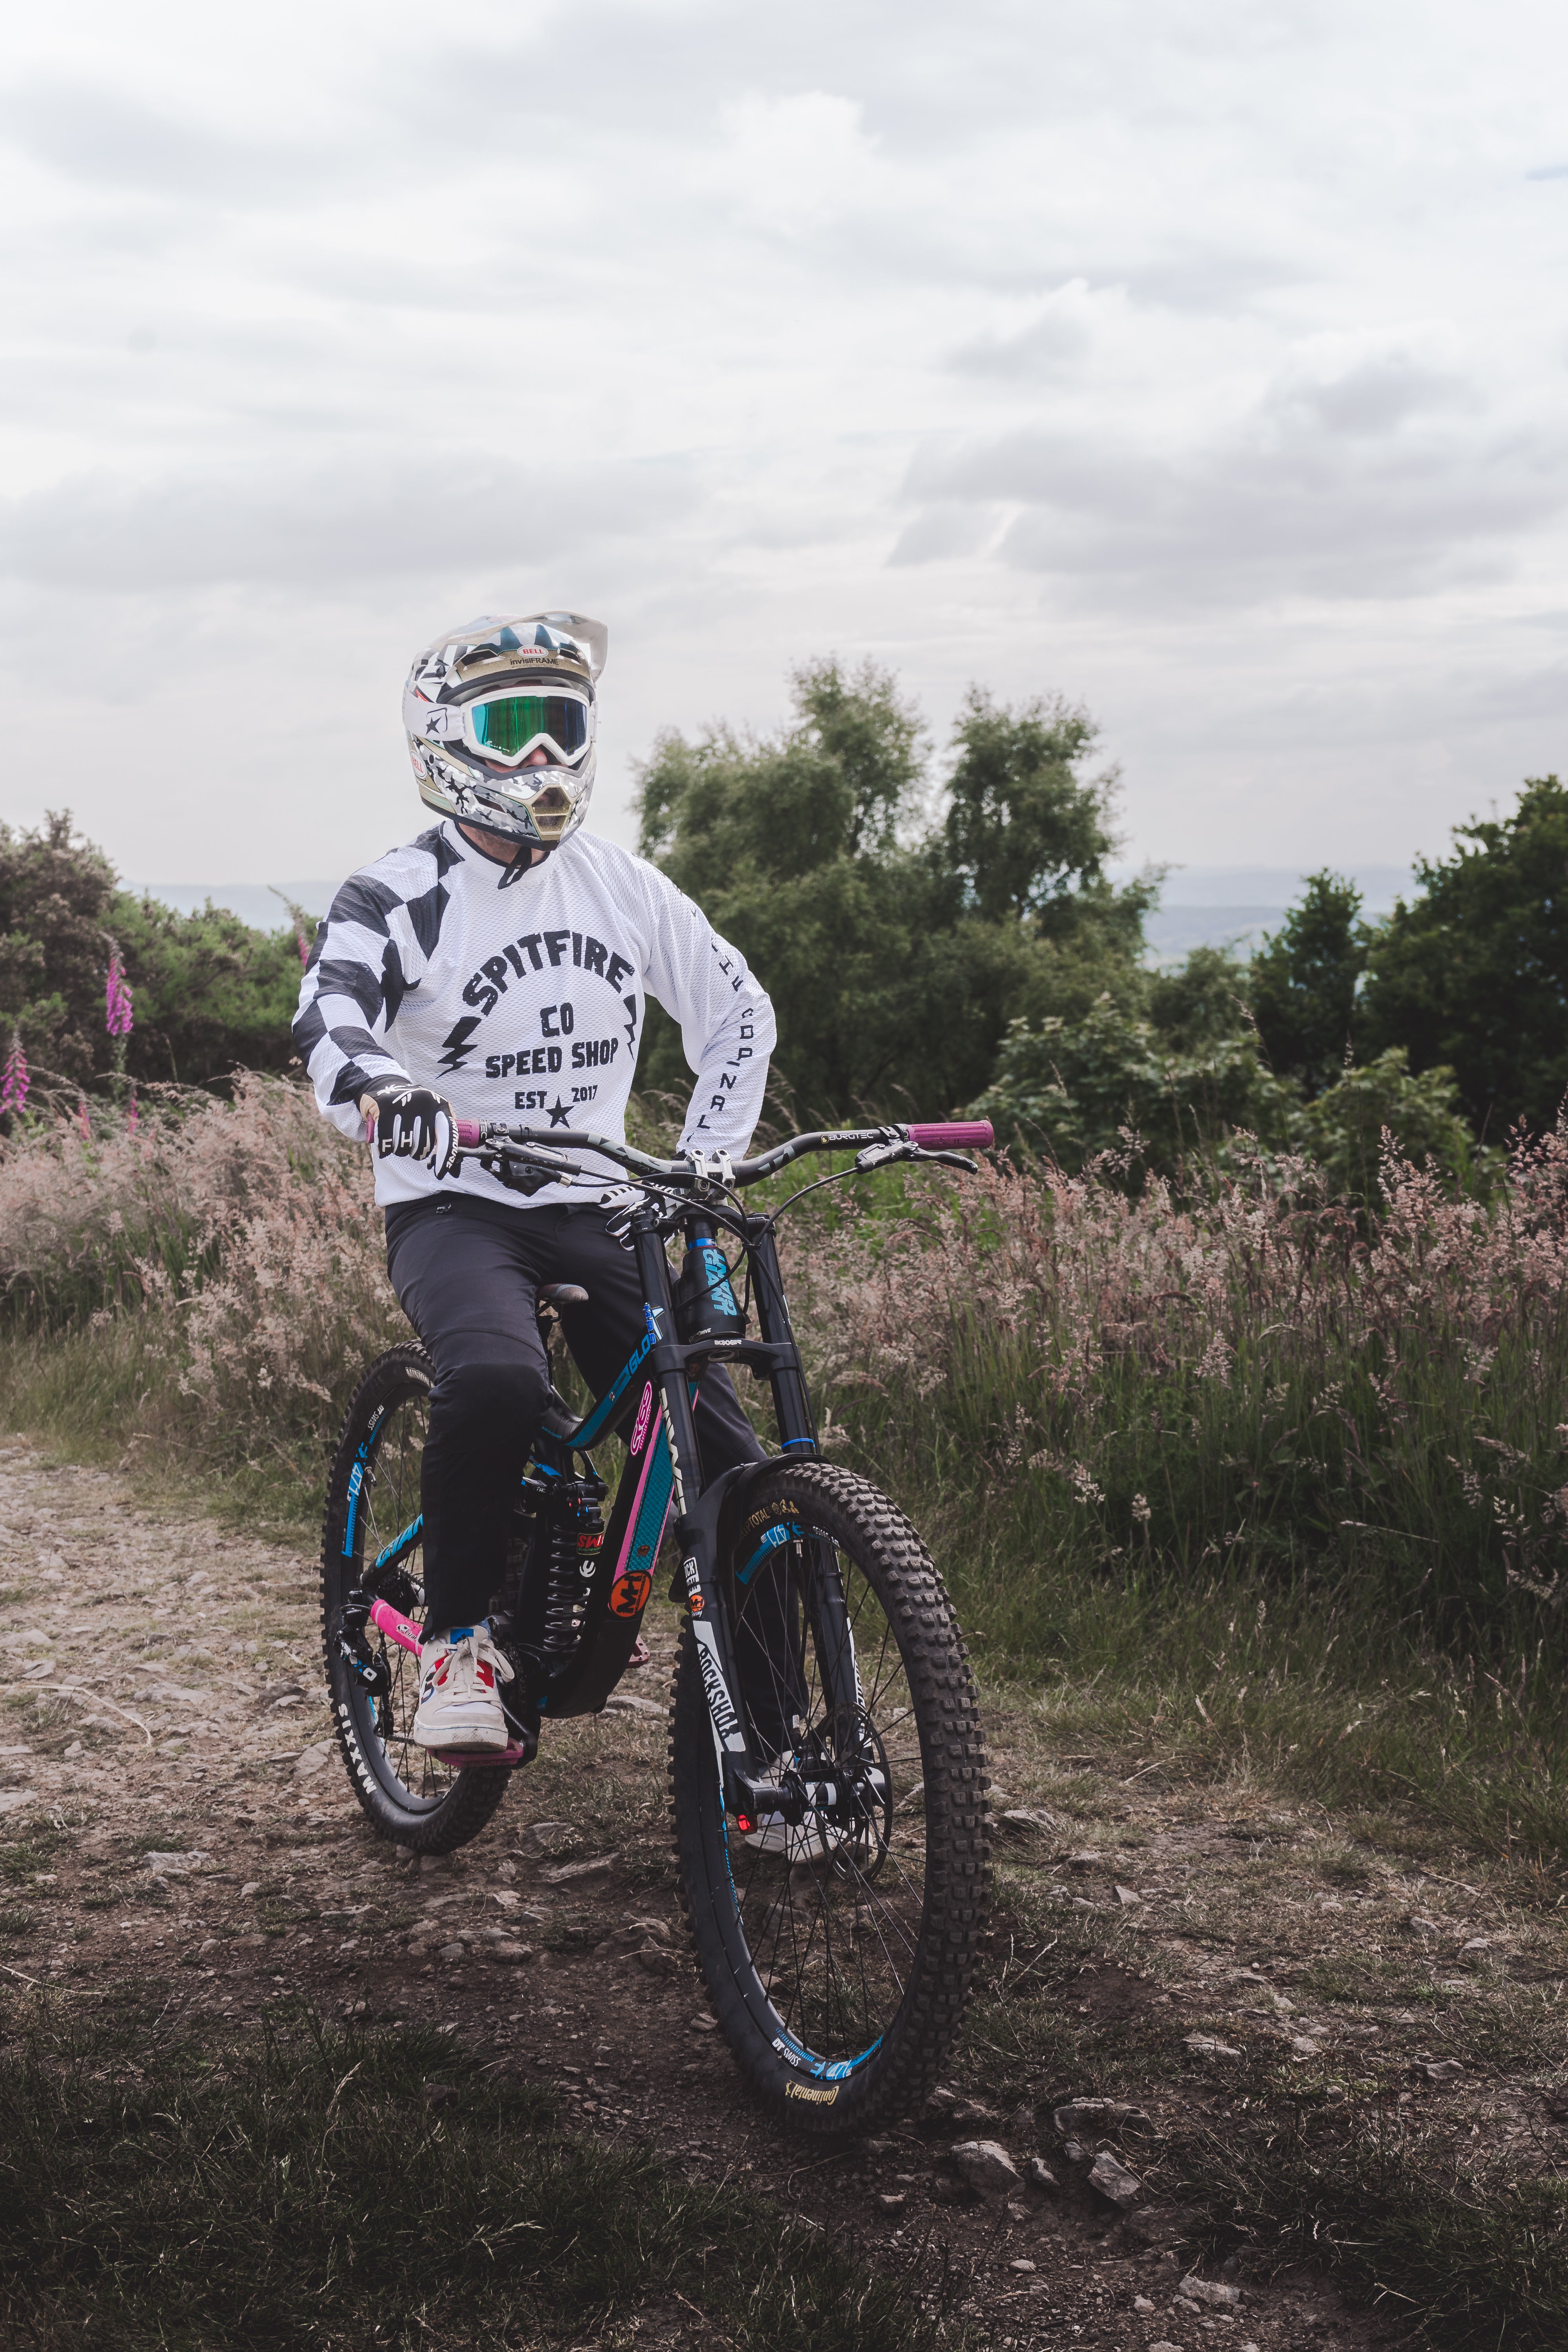 Spitfire Fuel The Adrenaline White MTB Jersey